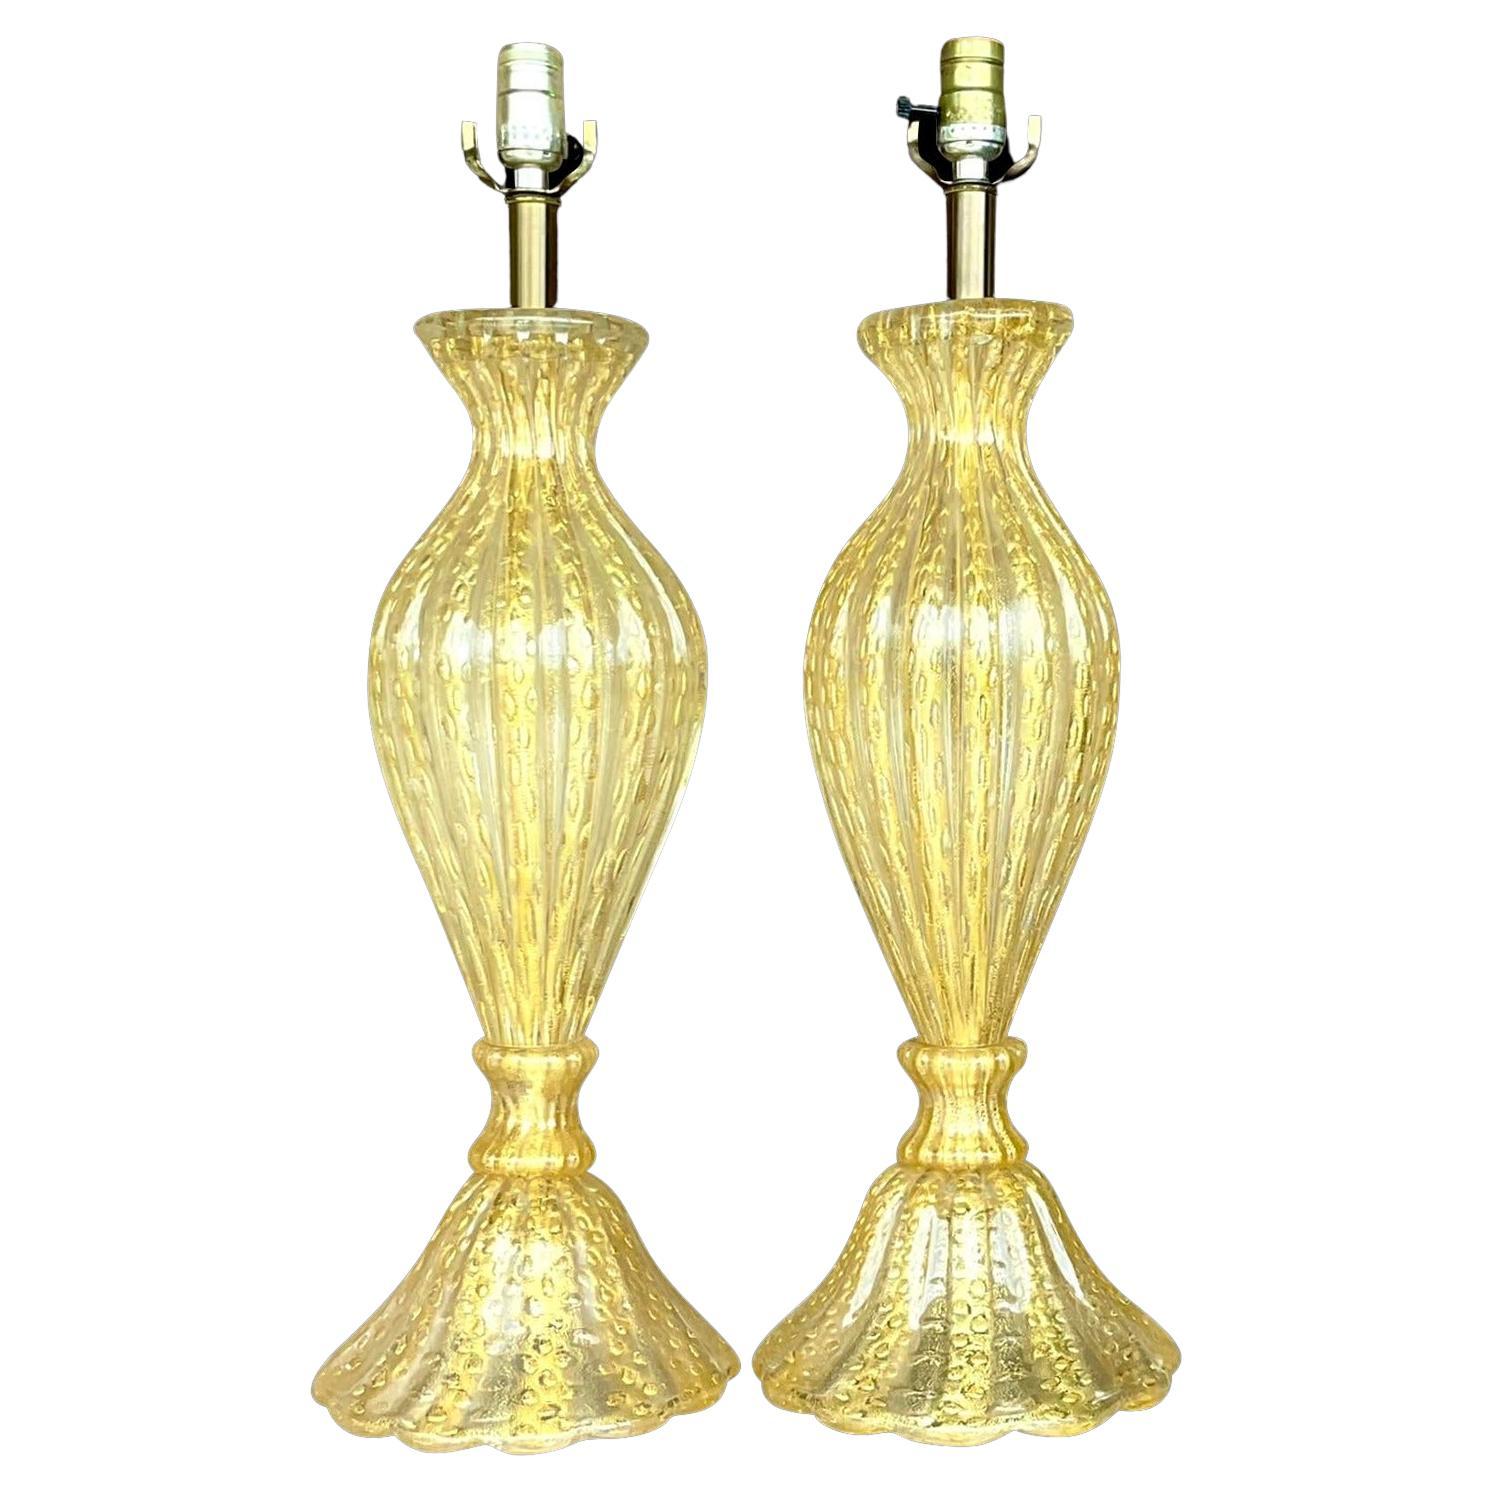 Vintage Regency Restored Murano Glass Table Lamps - a Pair For Sale